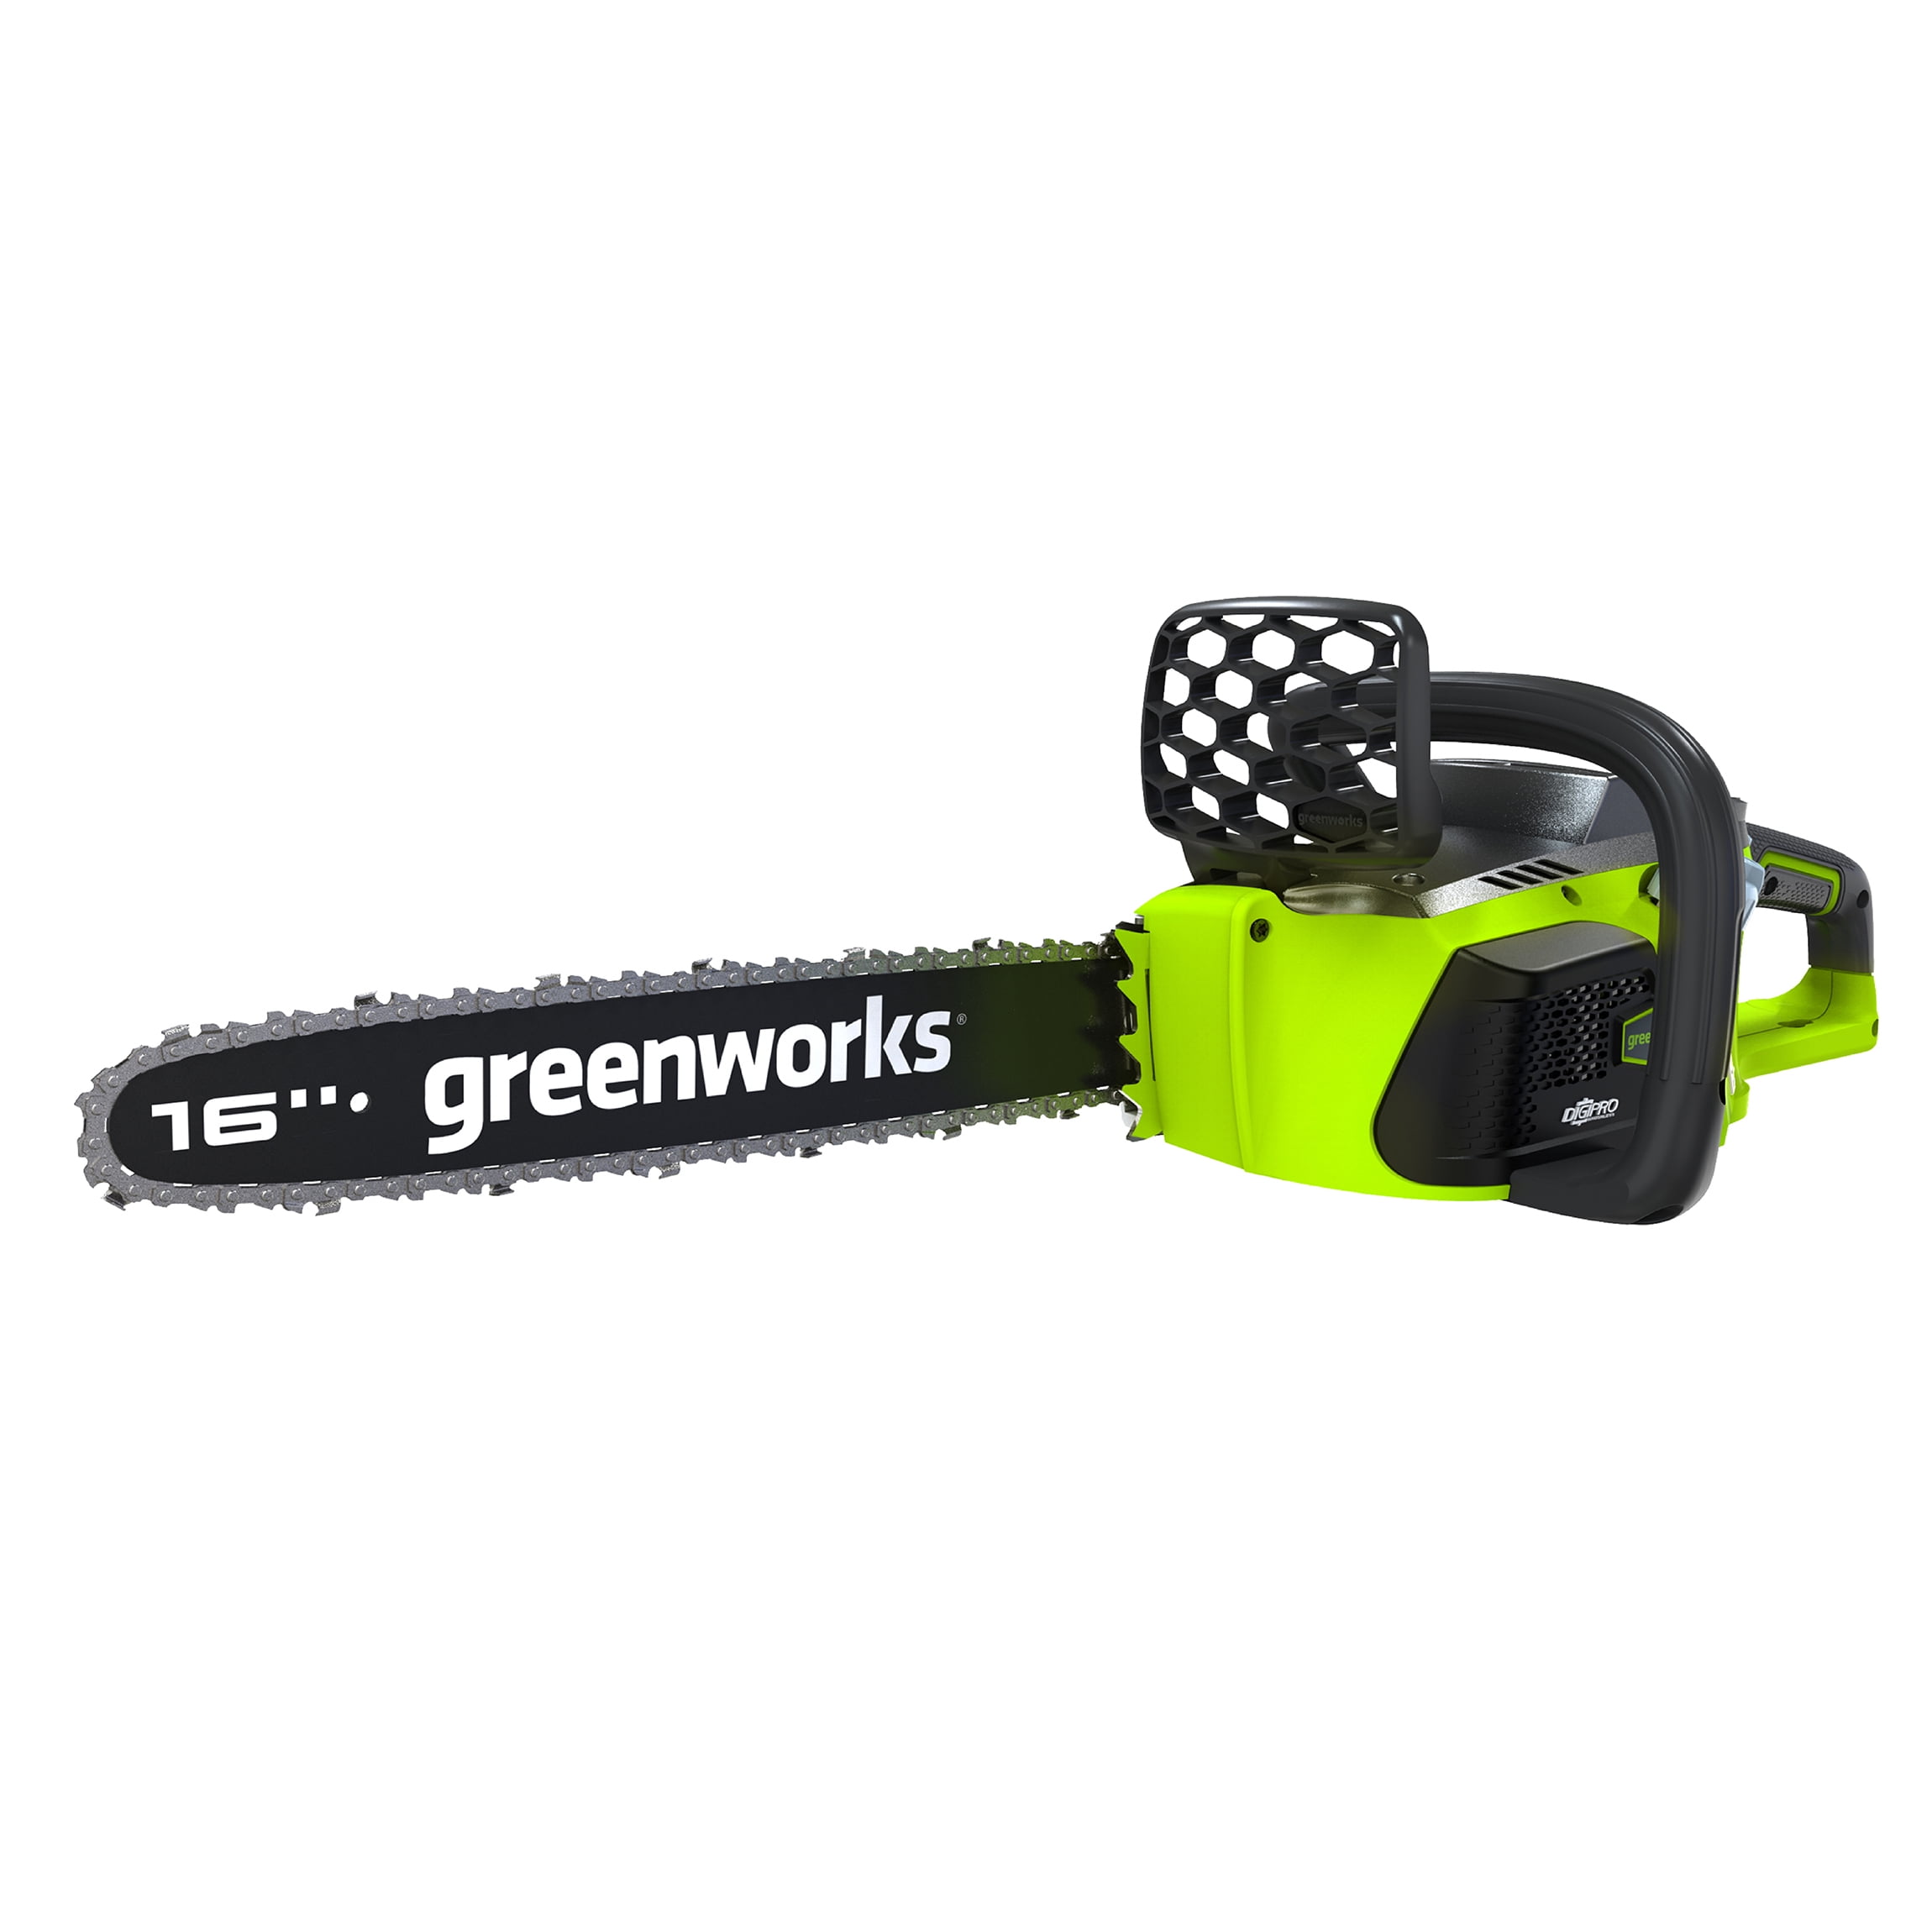 Greenworks 2000219 G-MAX 40V 12-In Chainsaw includes battery and charger 